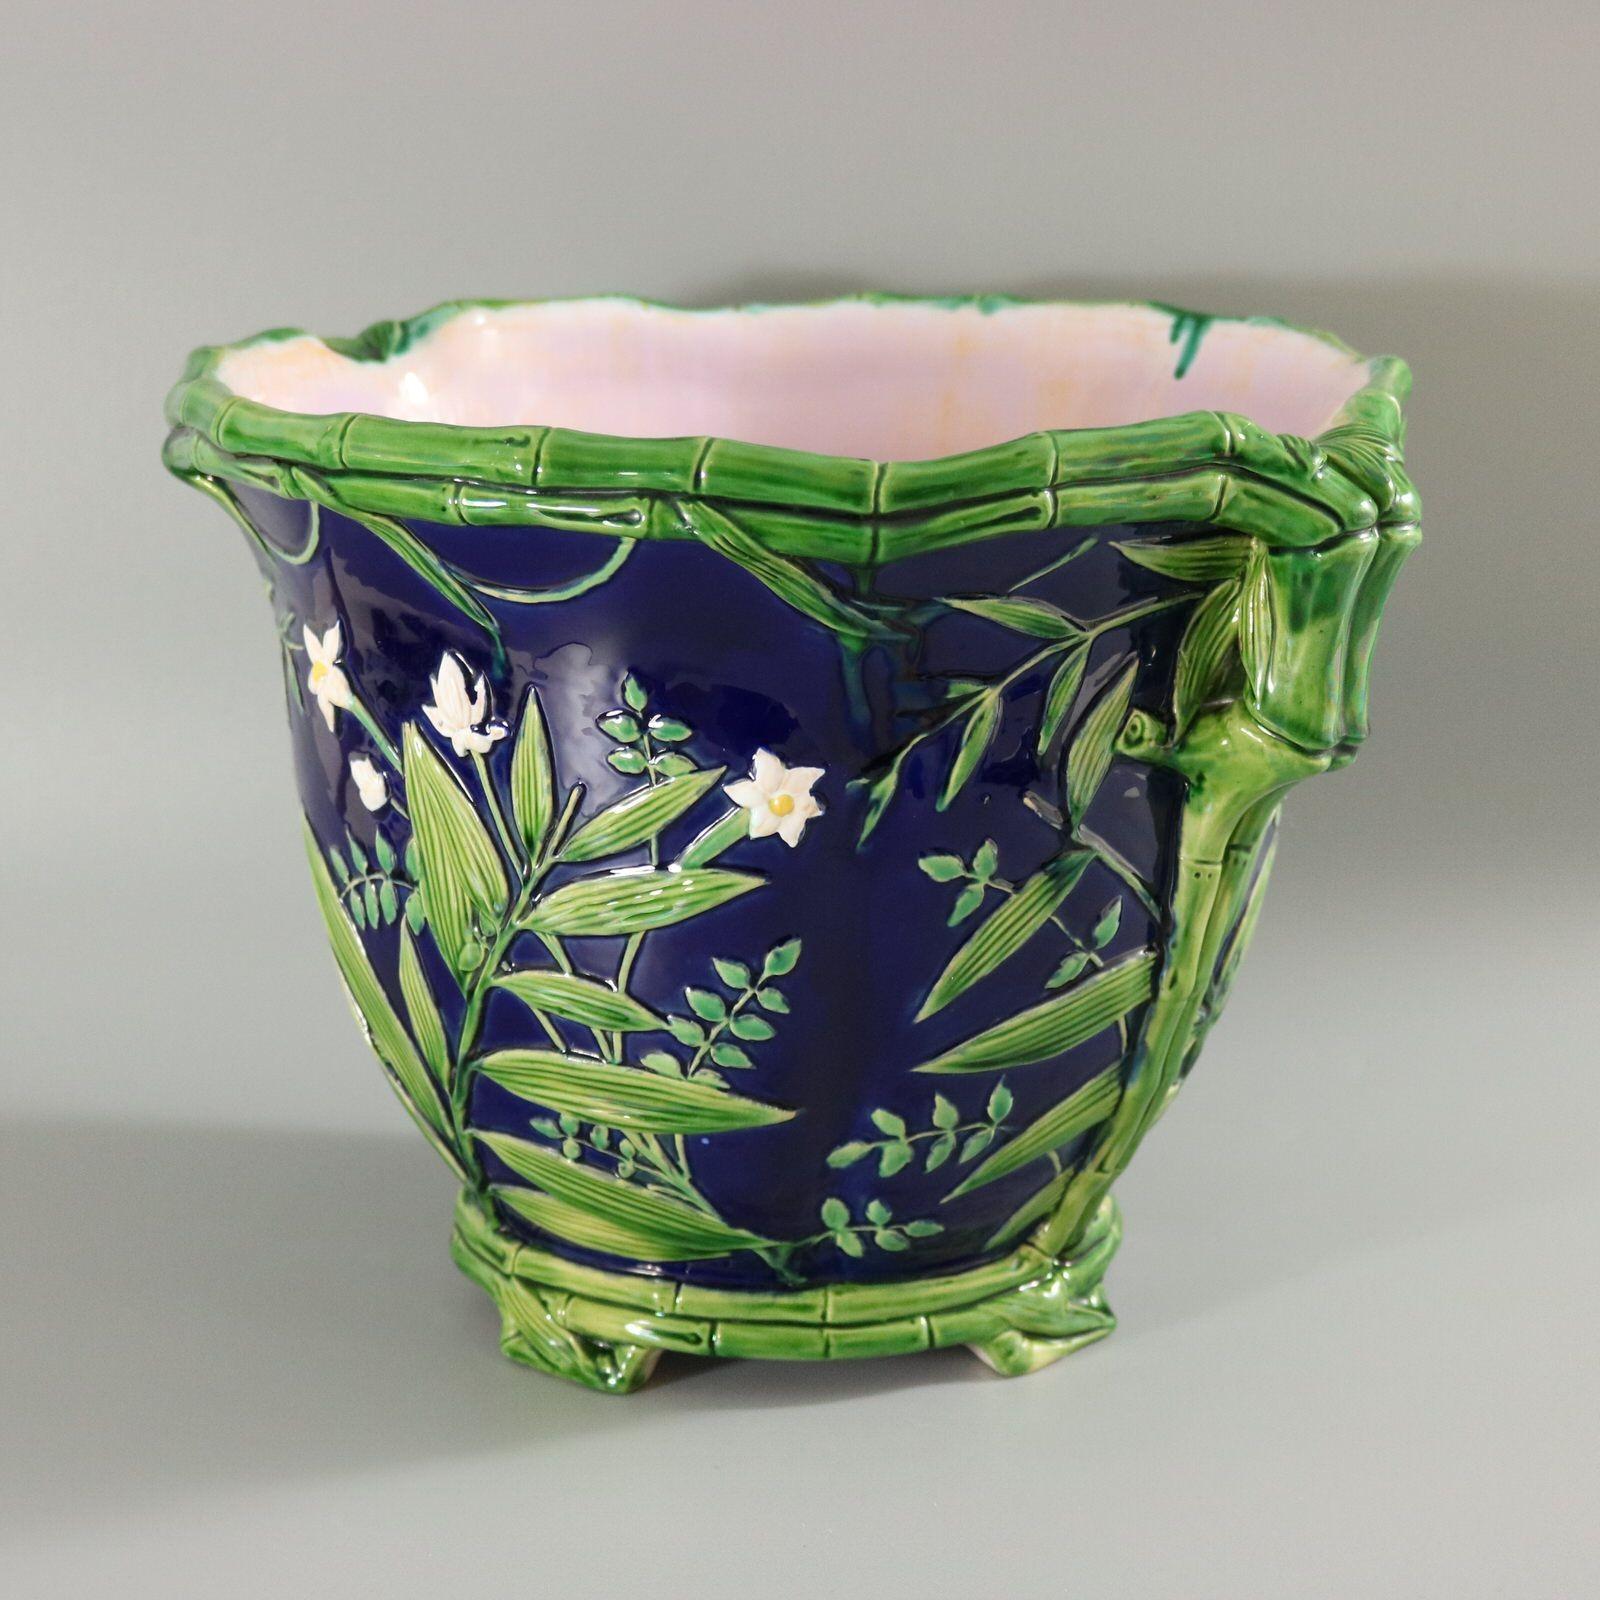 Minton Majolica jardinière which features bamboo branches, leaves and flowers. Cobalt blue ground version. Colouration: cobalt blue, green, white, are predominant. The piece bears maker's marks for the Minton pottery. Marks include a factory